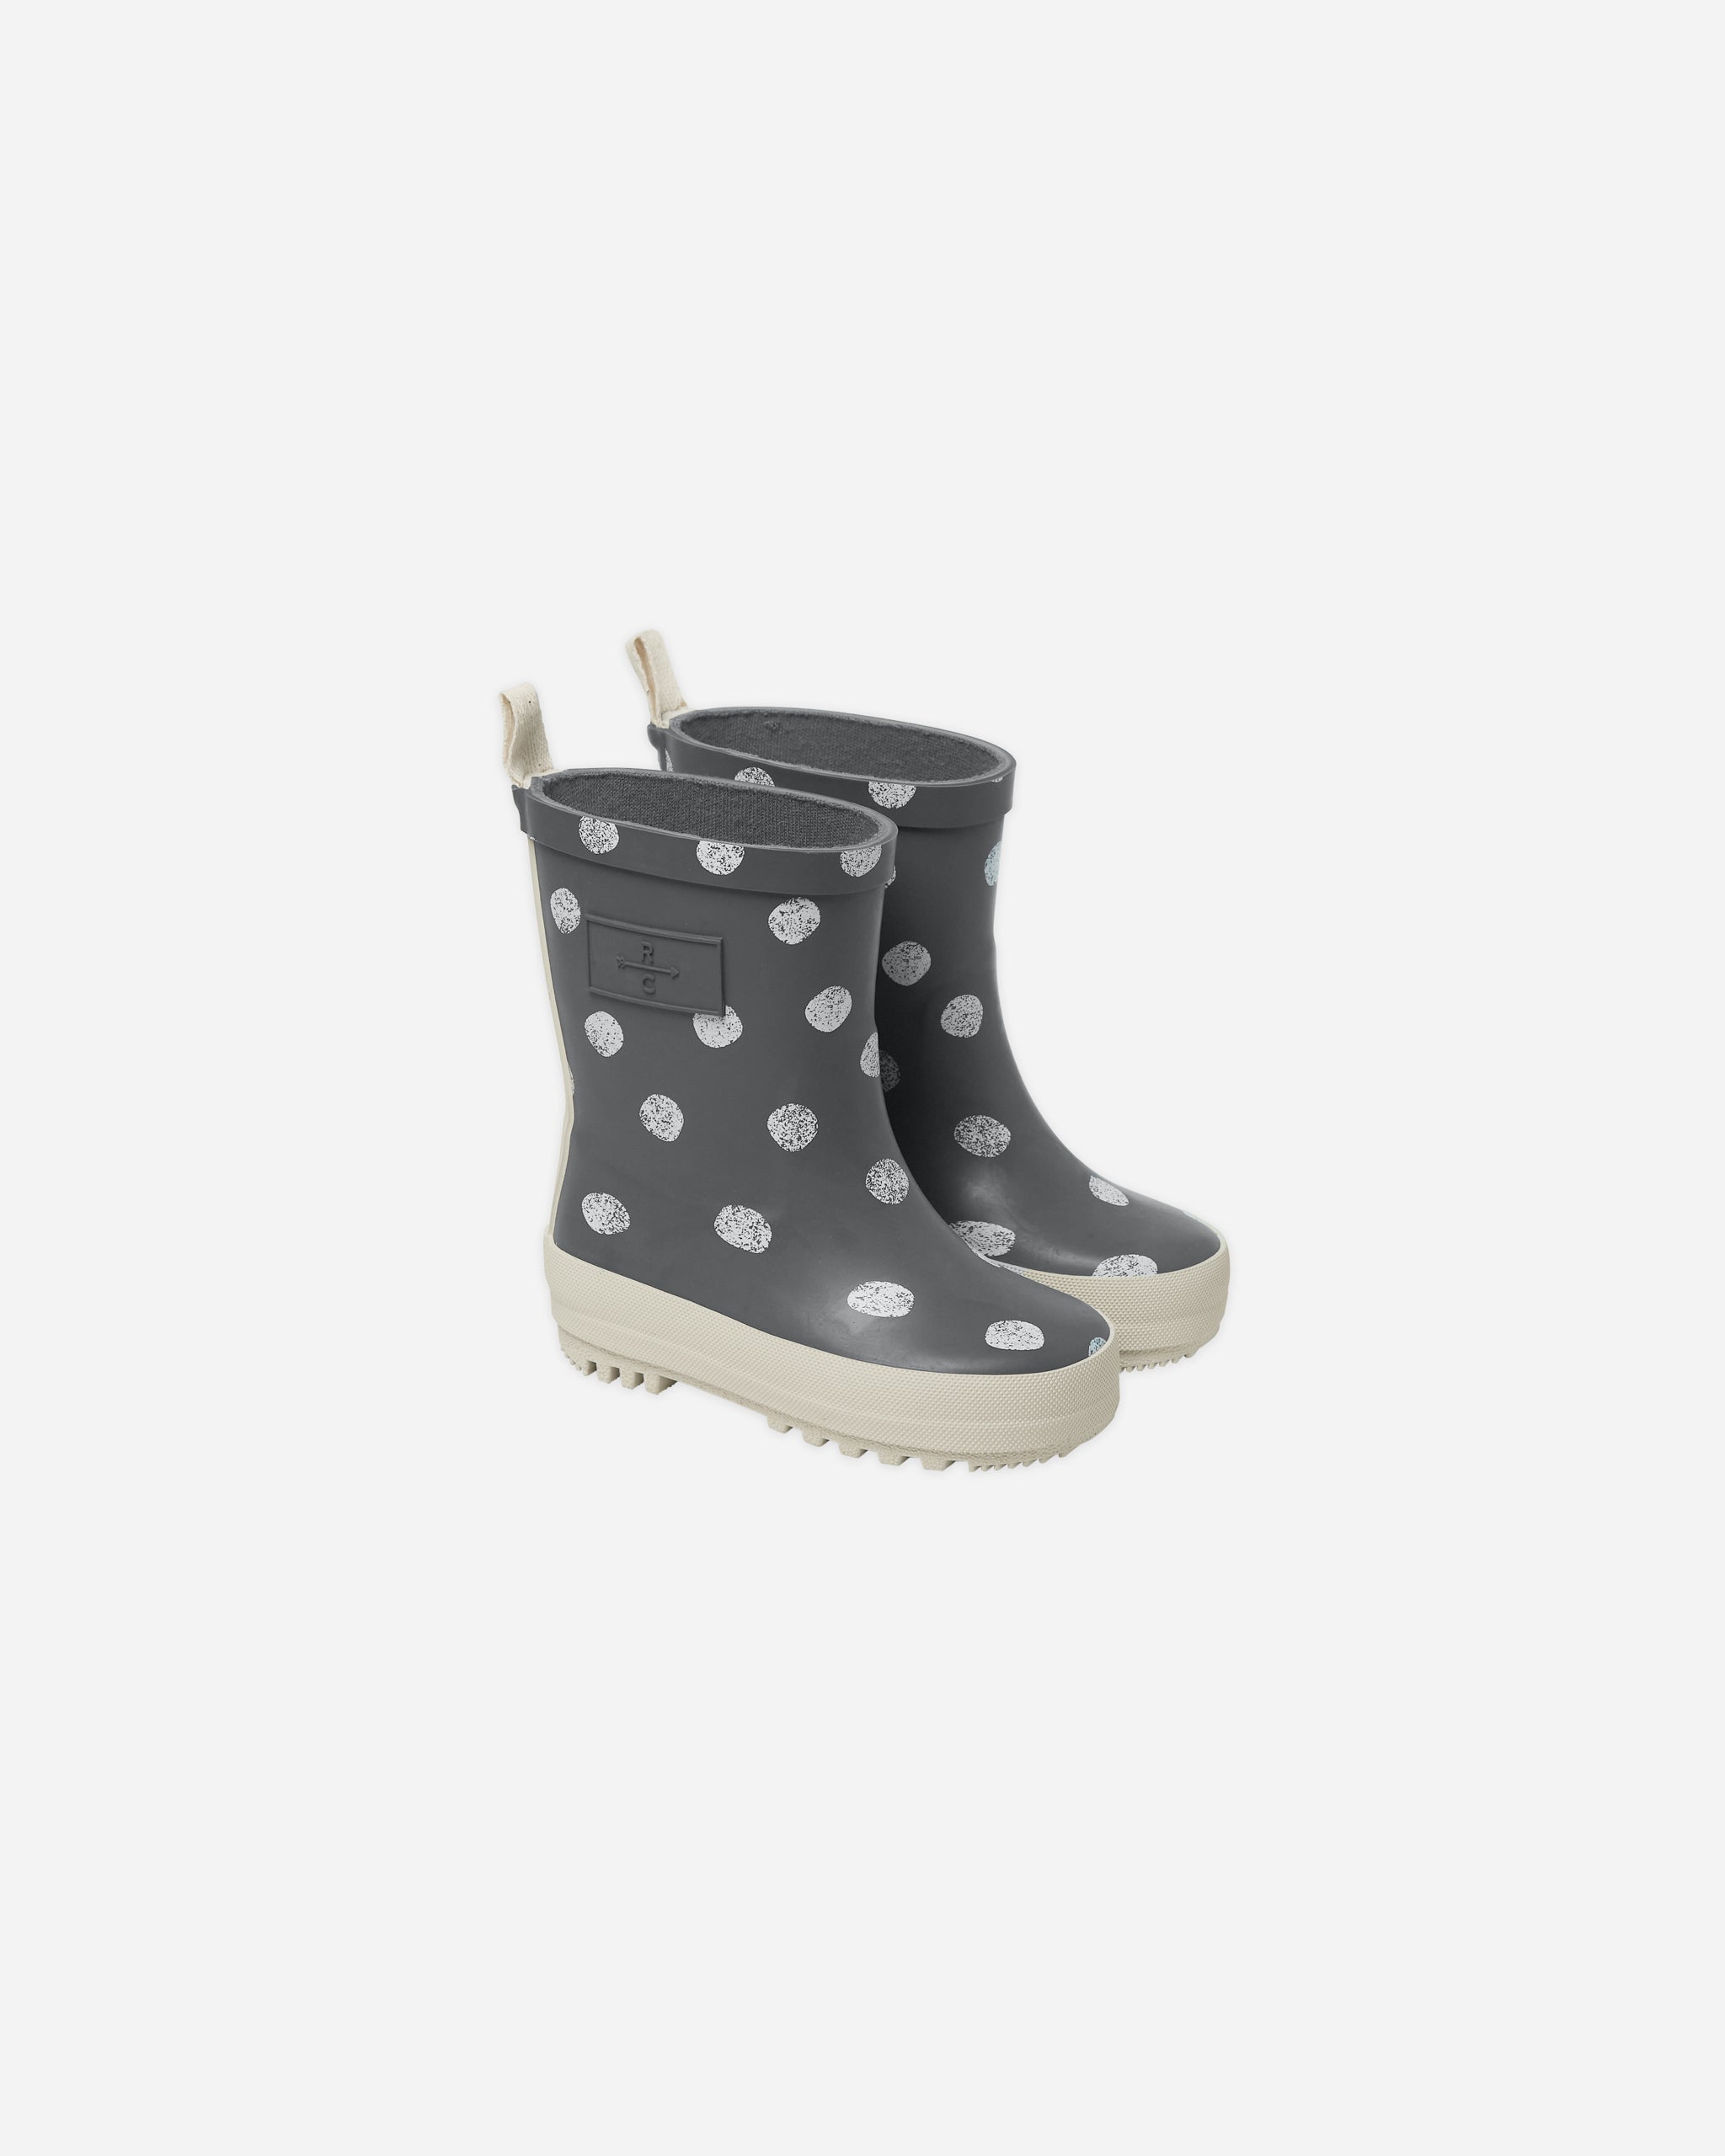 Rainboot || Dotty - Rylee + Cru | Kids Clothes | Trendy Baby Clothes | Modern Infant Outfits |